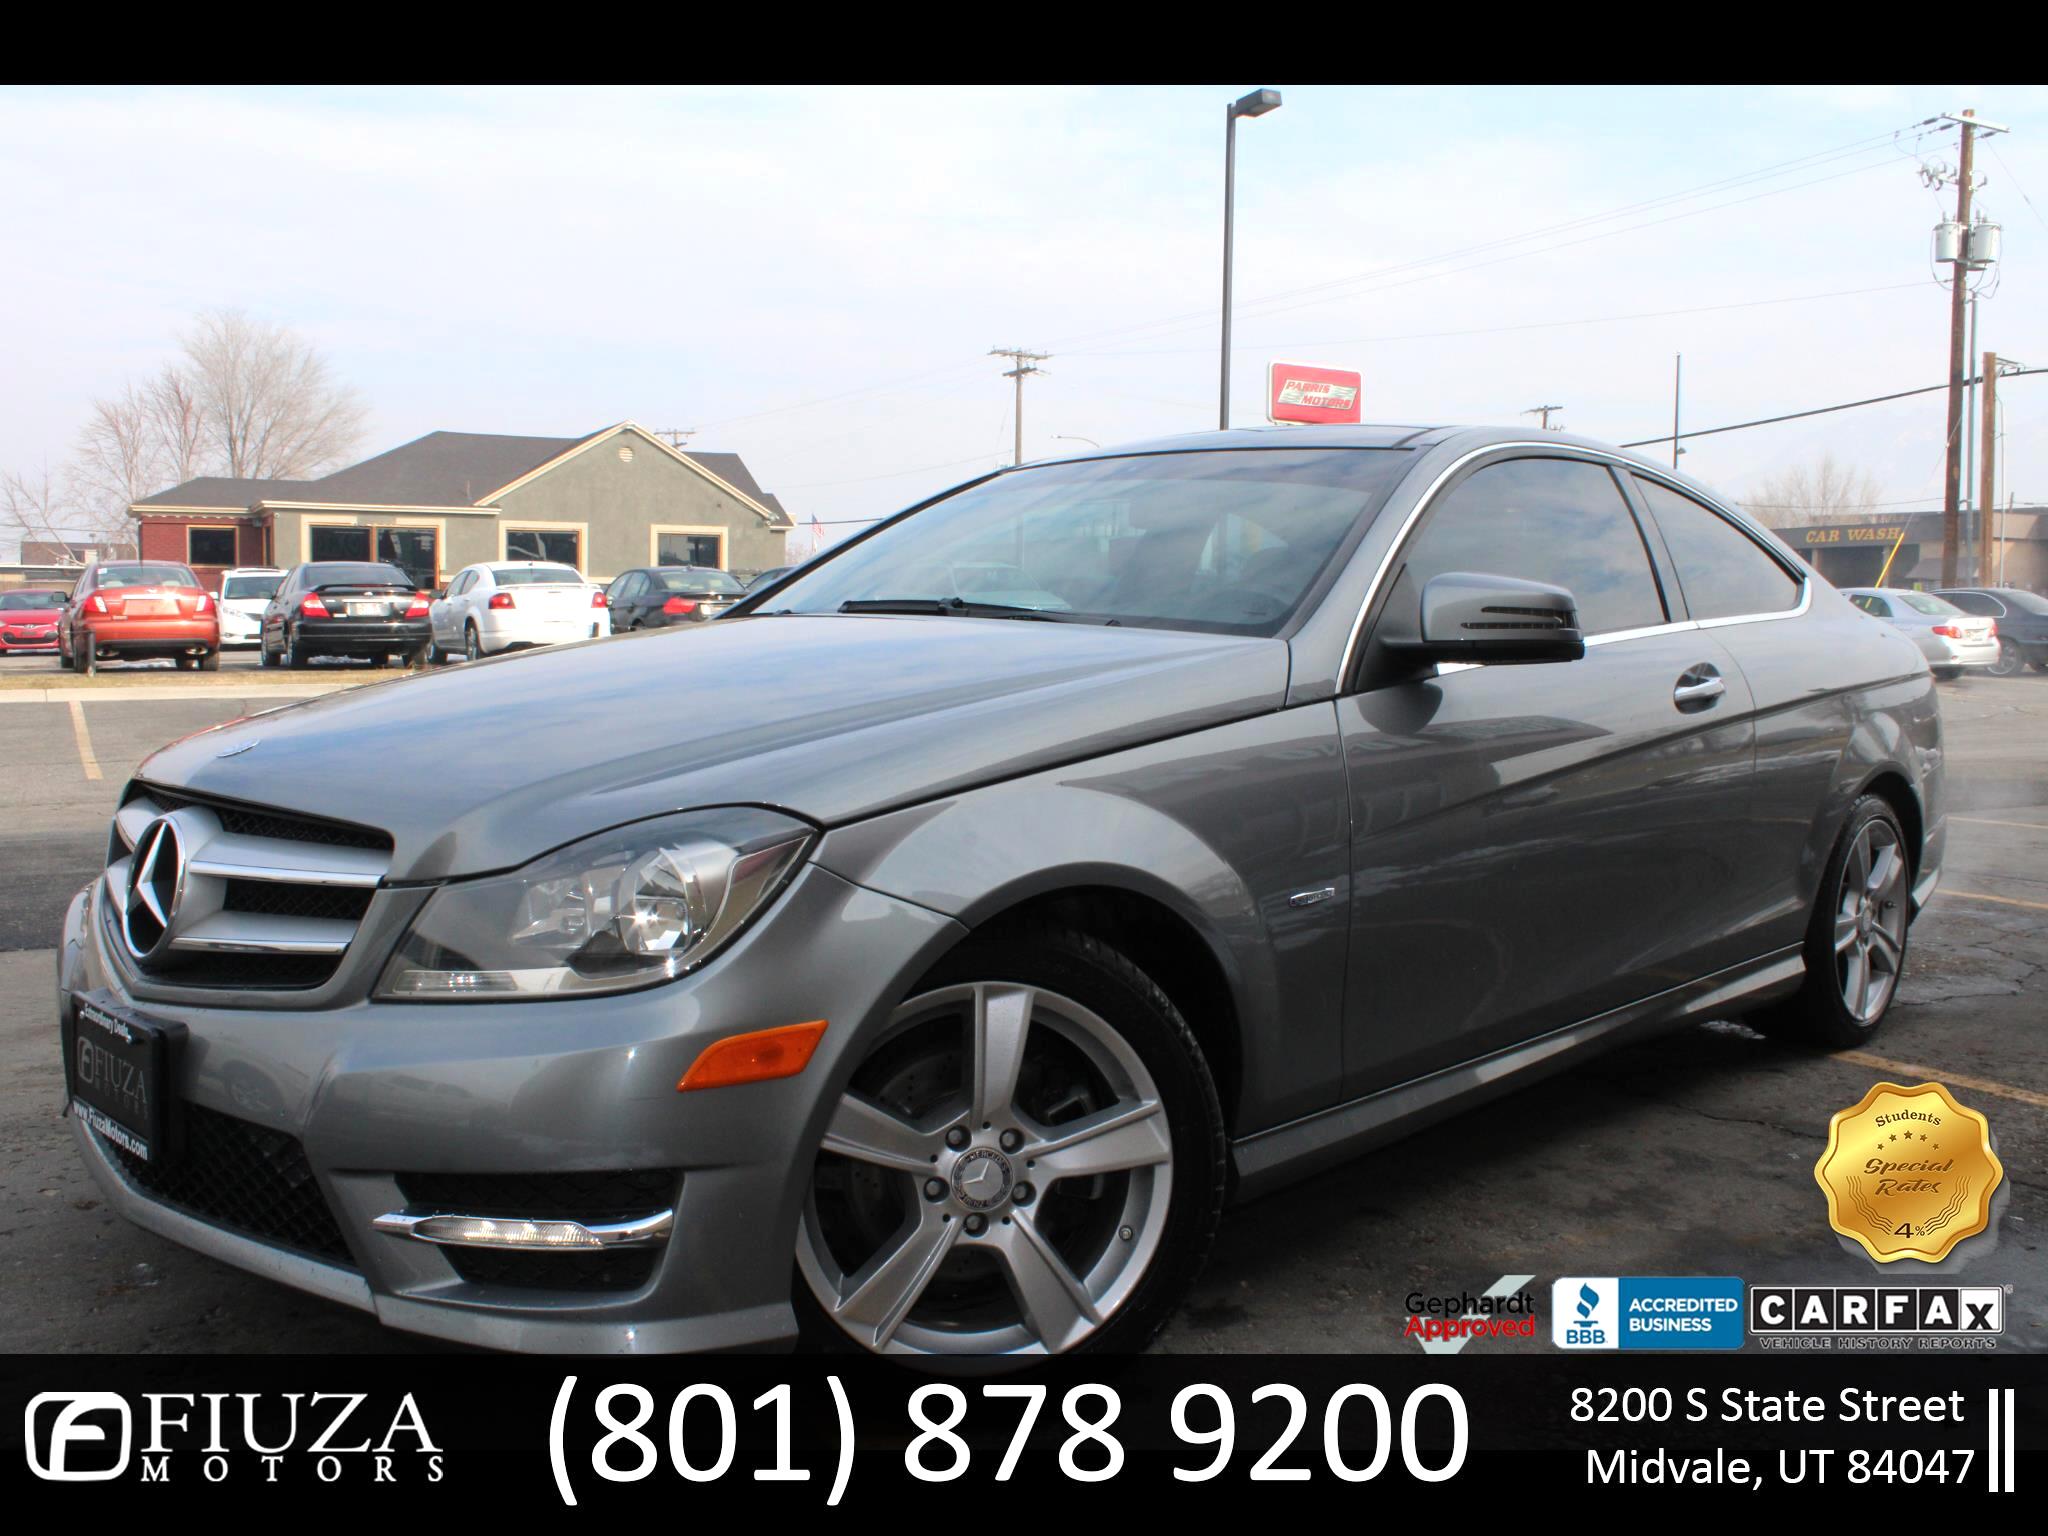 Used 2012 Mercedes Benz C Class C250 Coupe For Sale In Utah